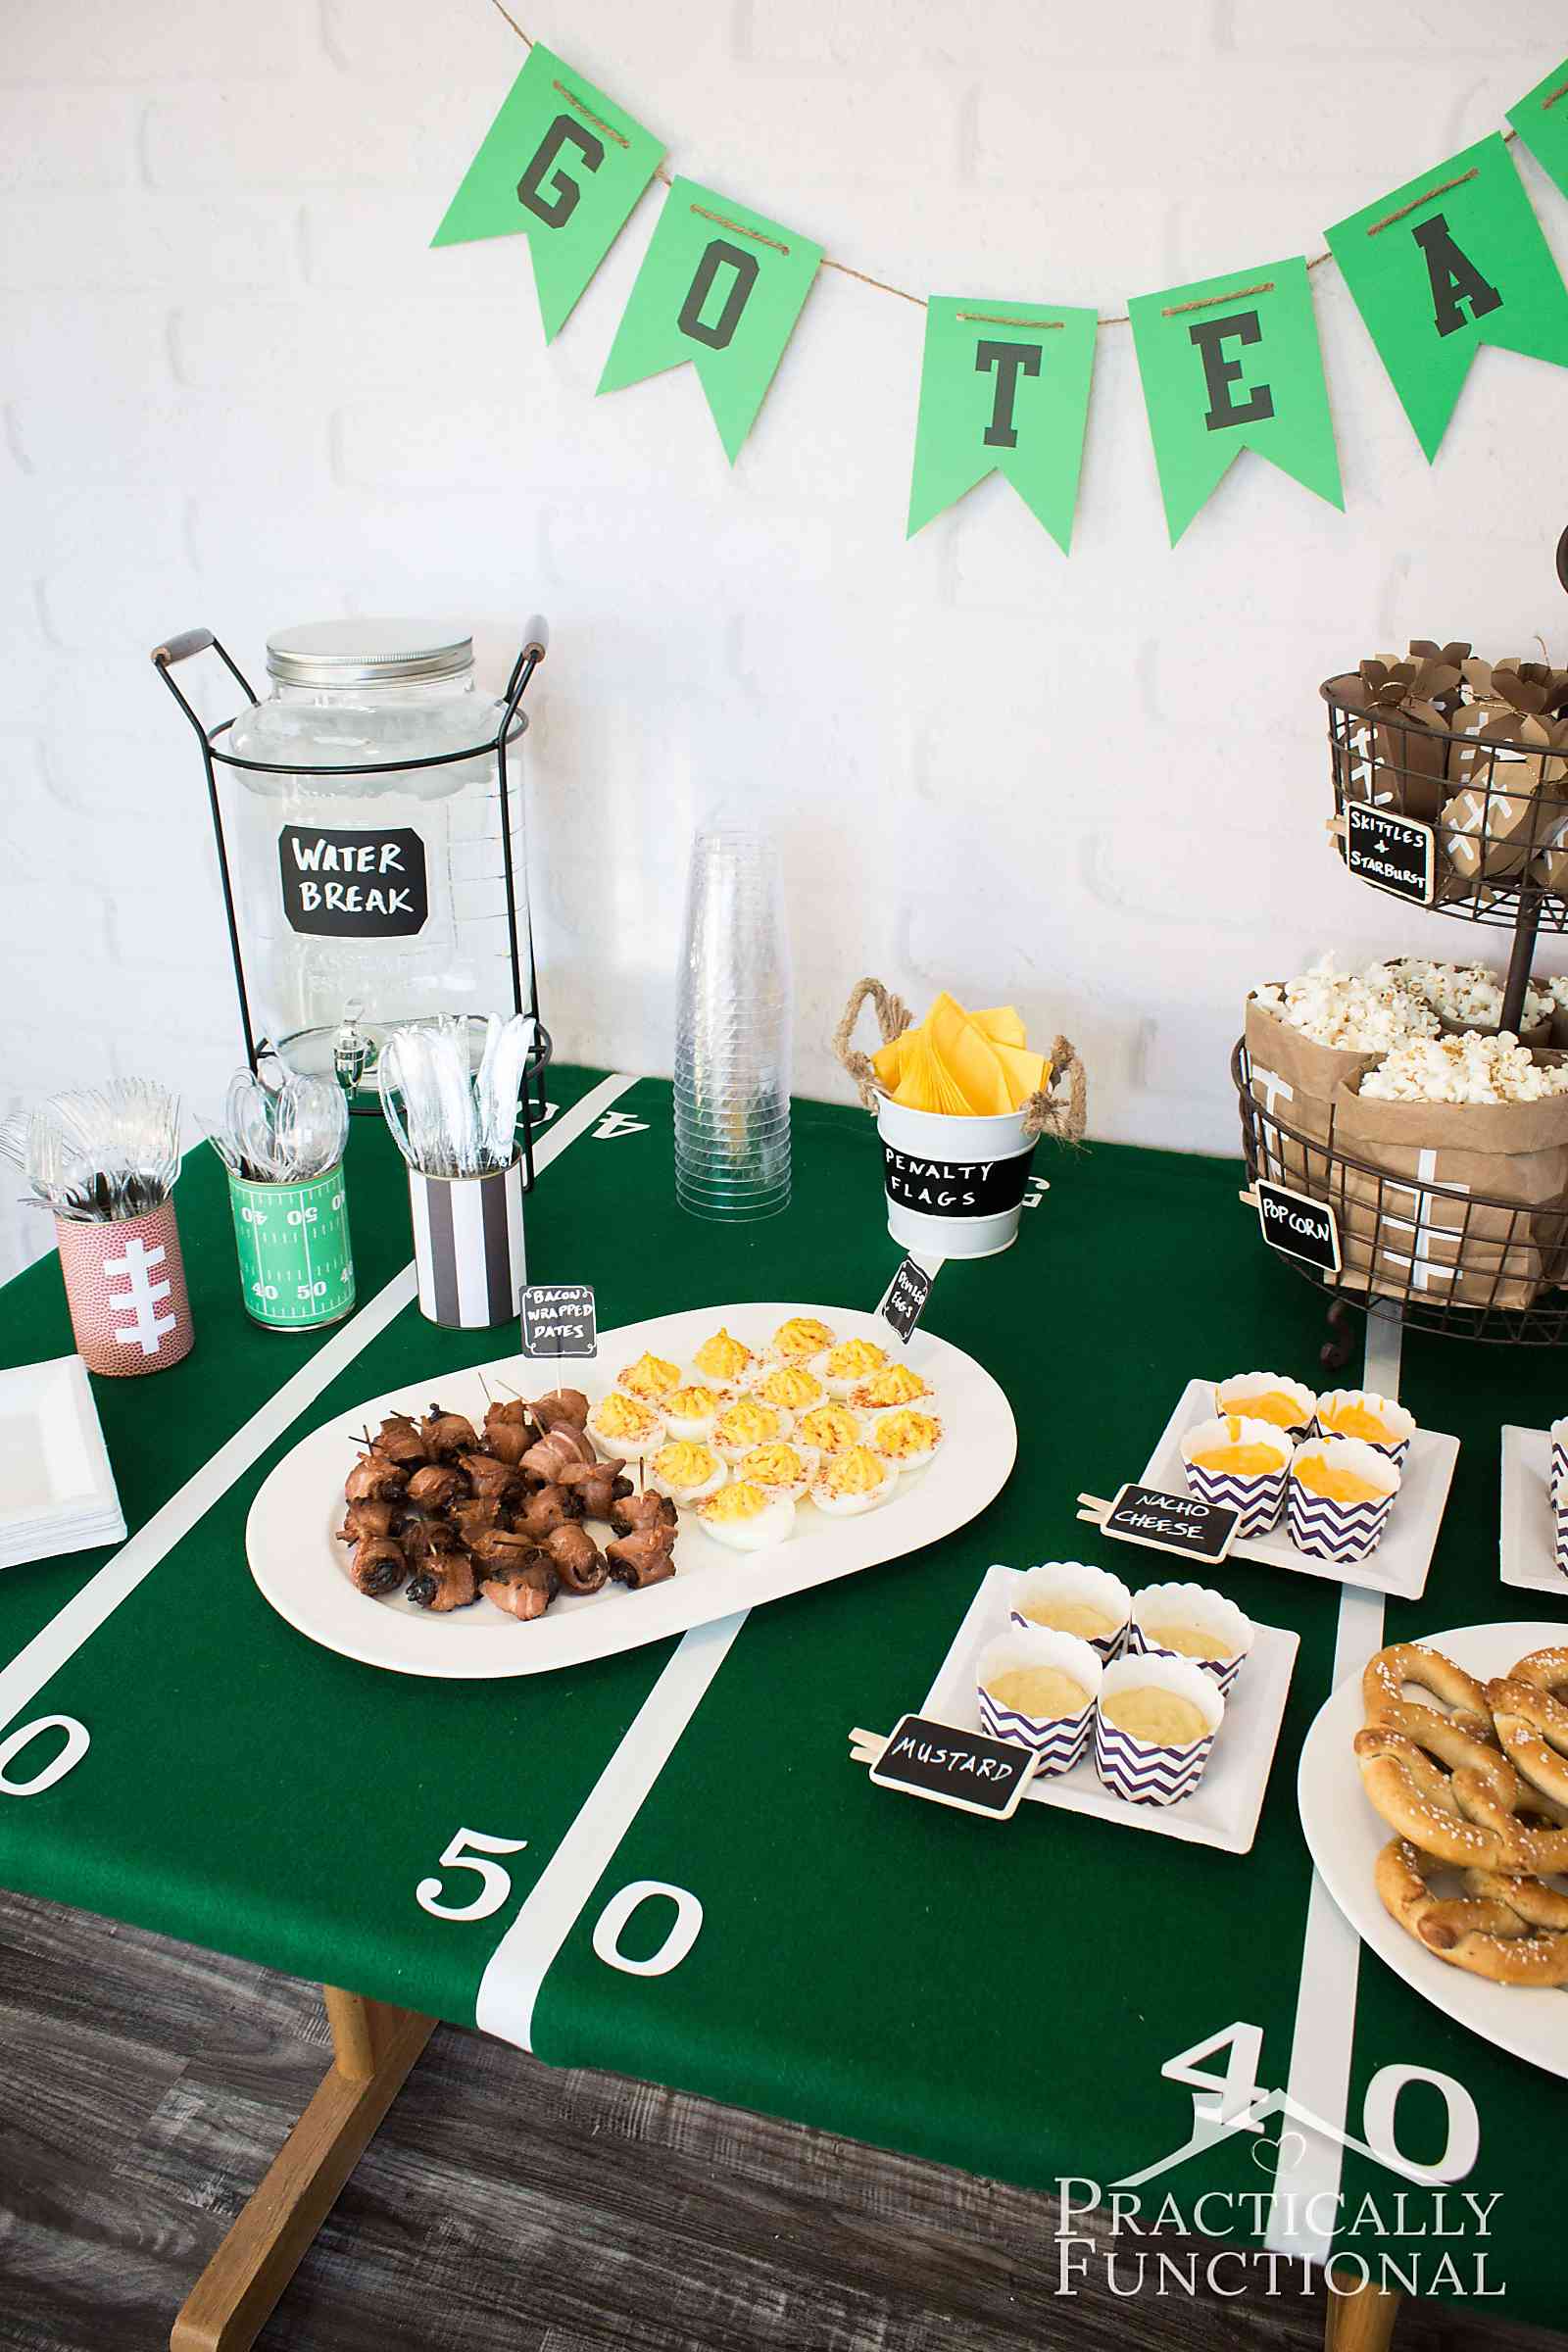 Make a DIY football field tablecloth using green felt and white duct tape! Perfect for a football party!